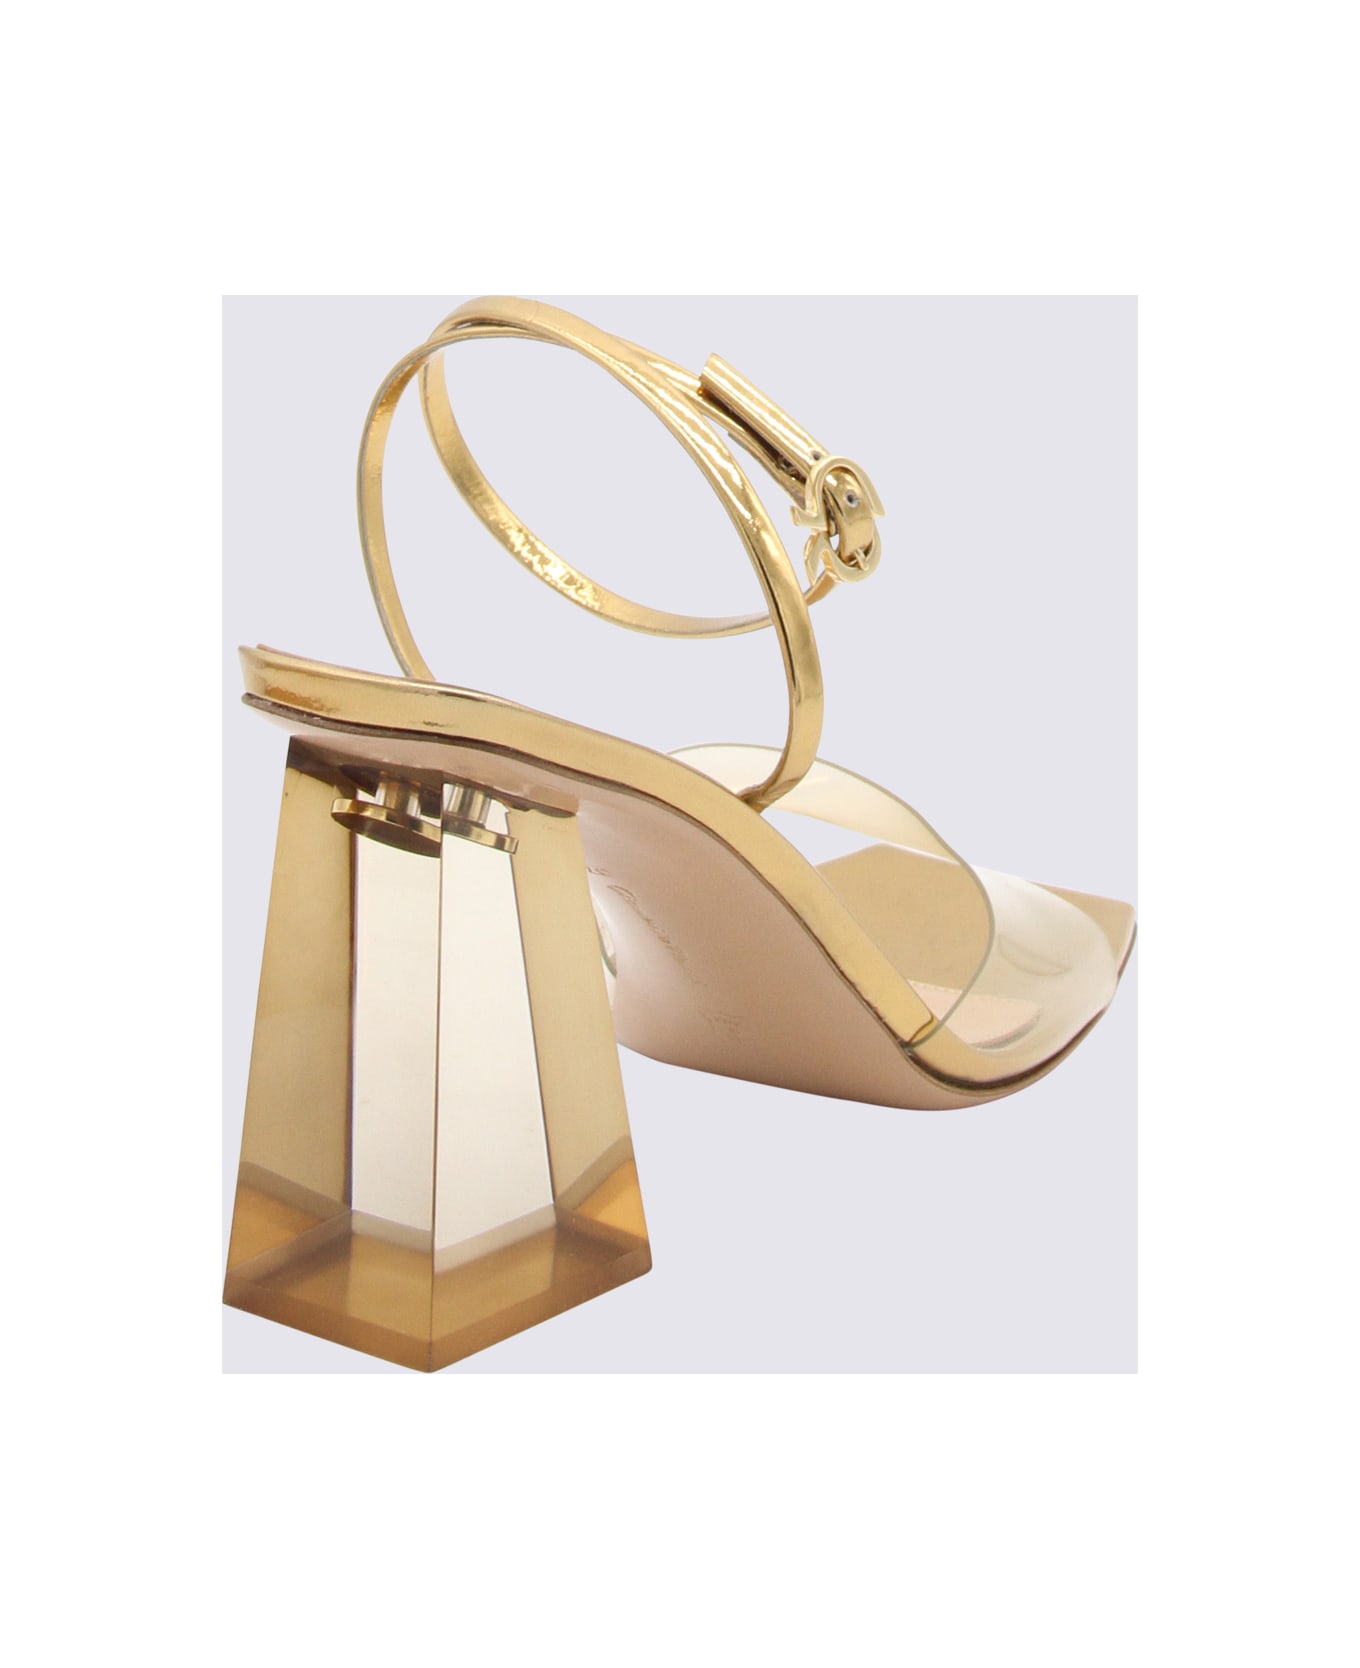 Gianvito Rossi Mekong Leather And Pvc Cosmic Sandals - Golden